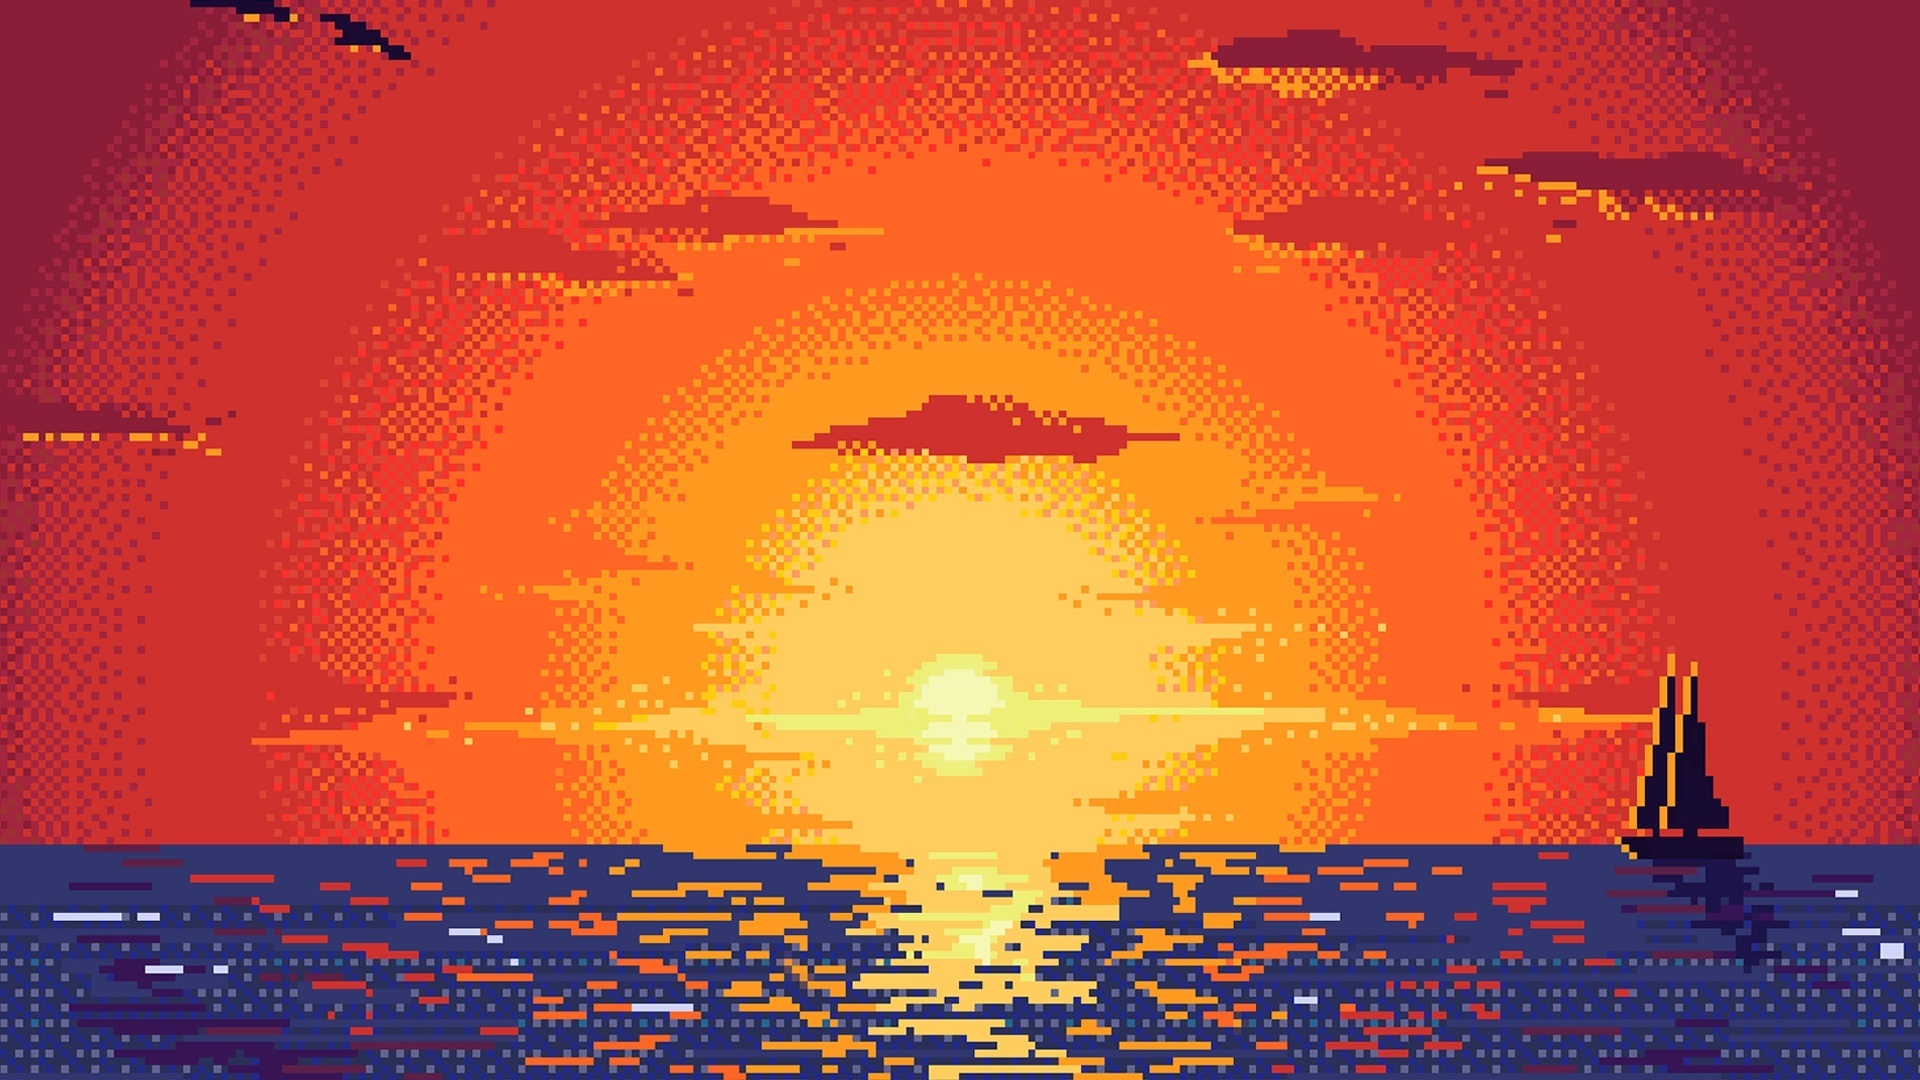 Sunset, pixel art, abstract wallpaper, HD image, picture, background, 0047e2